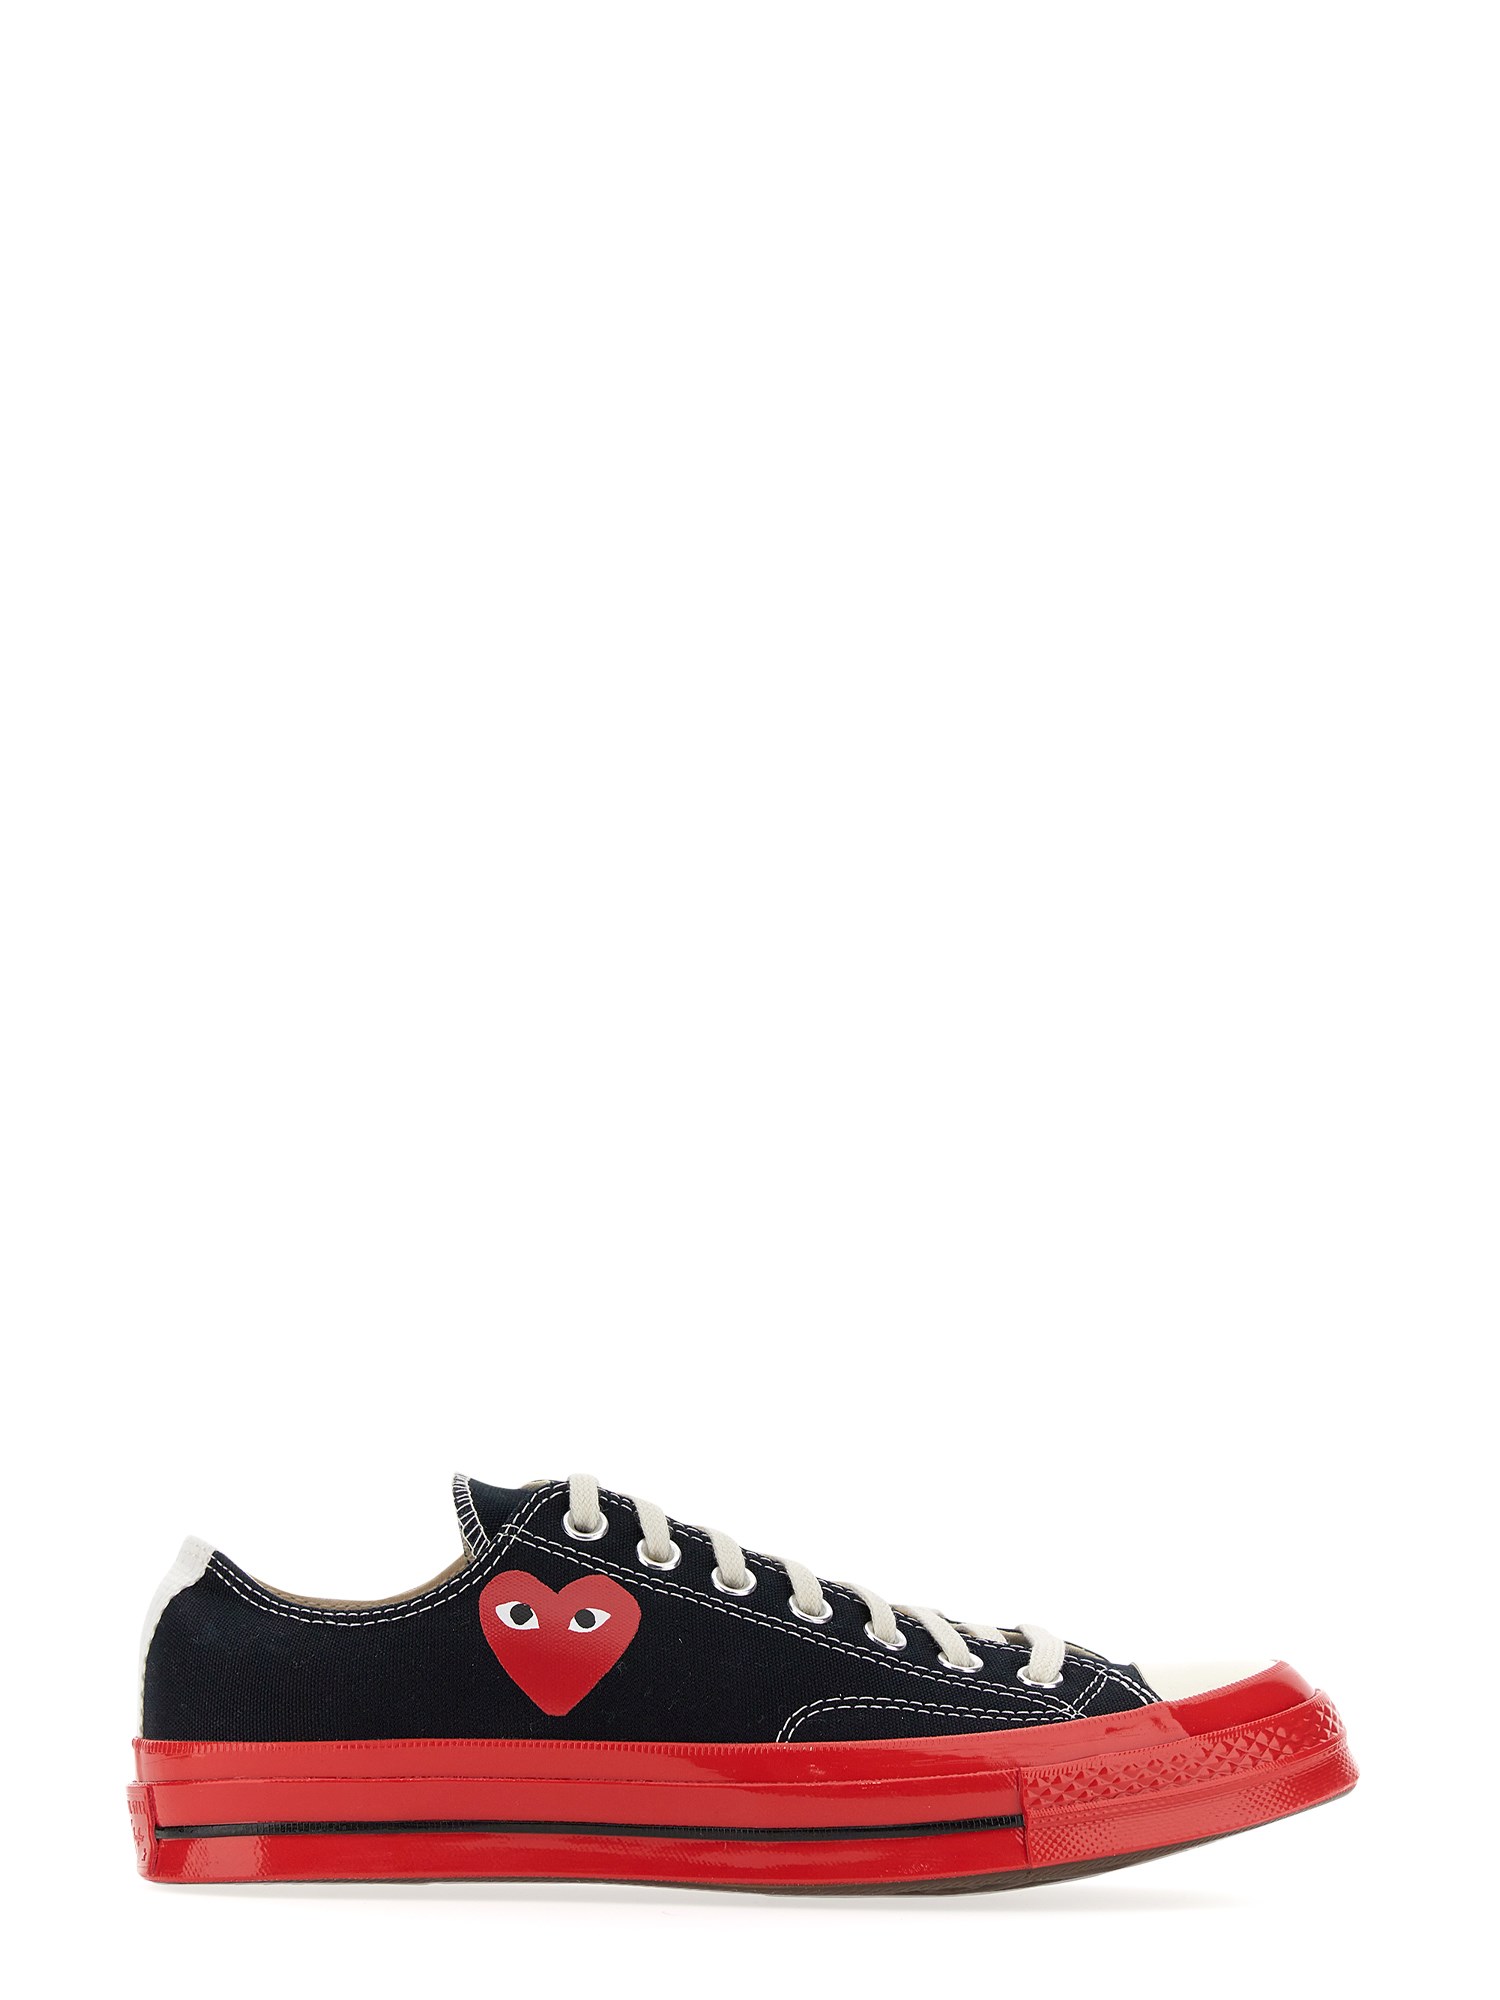 Comme Des Garcons Play Converse Heart Print Sneaker In Black